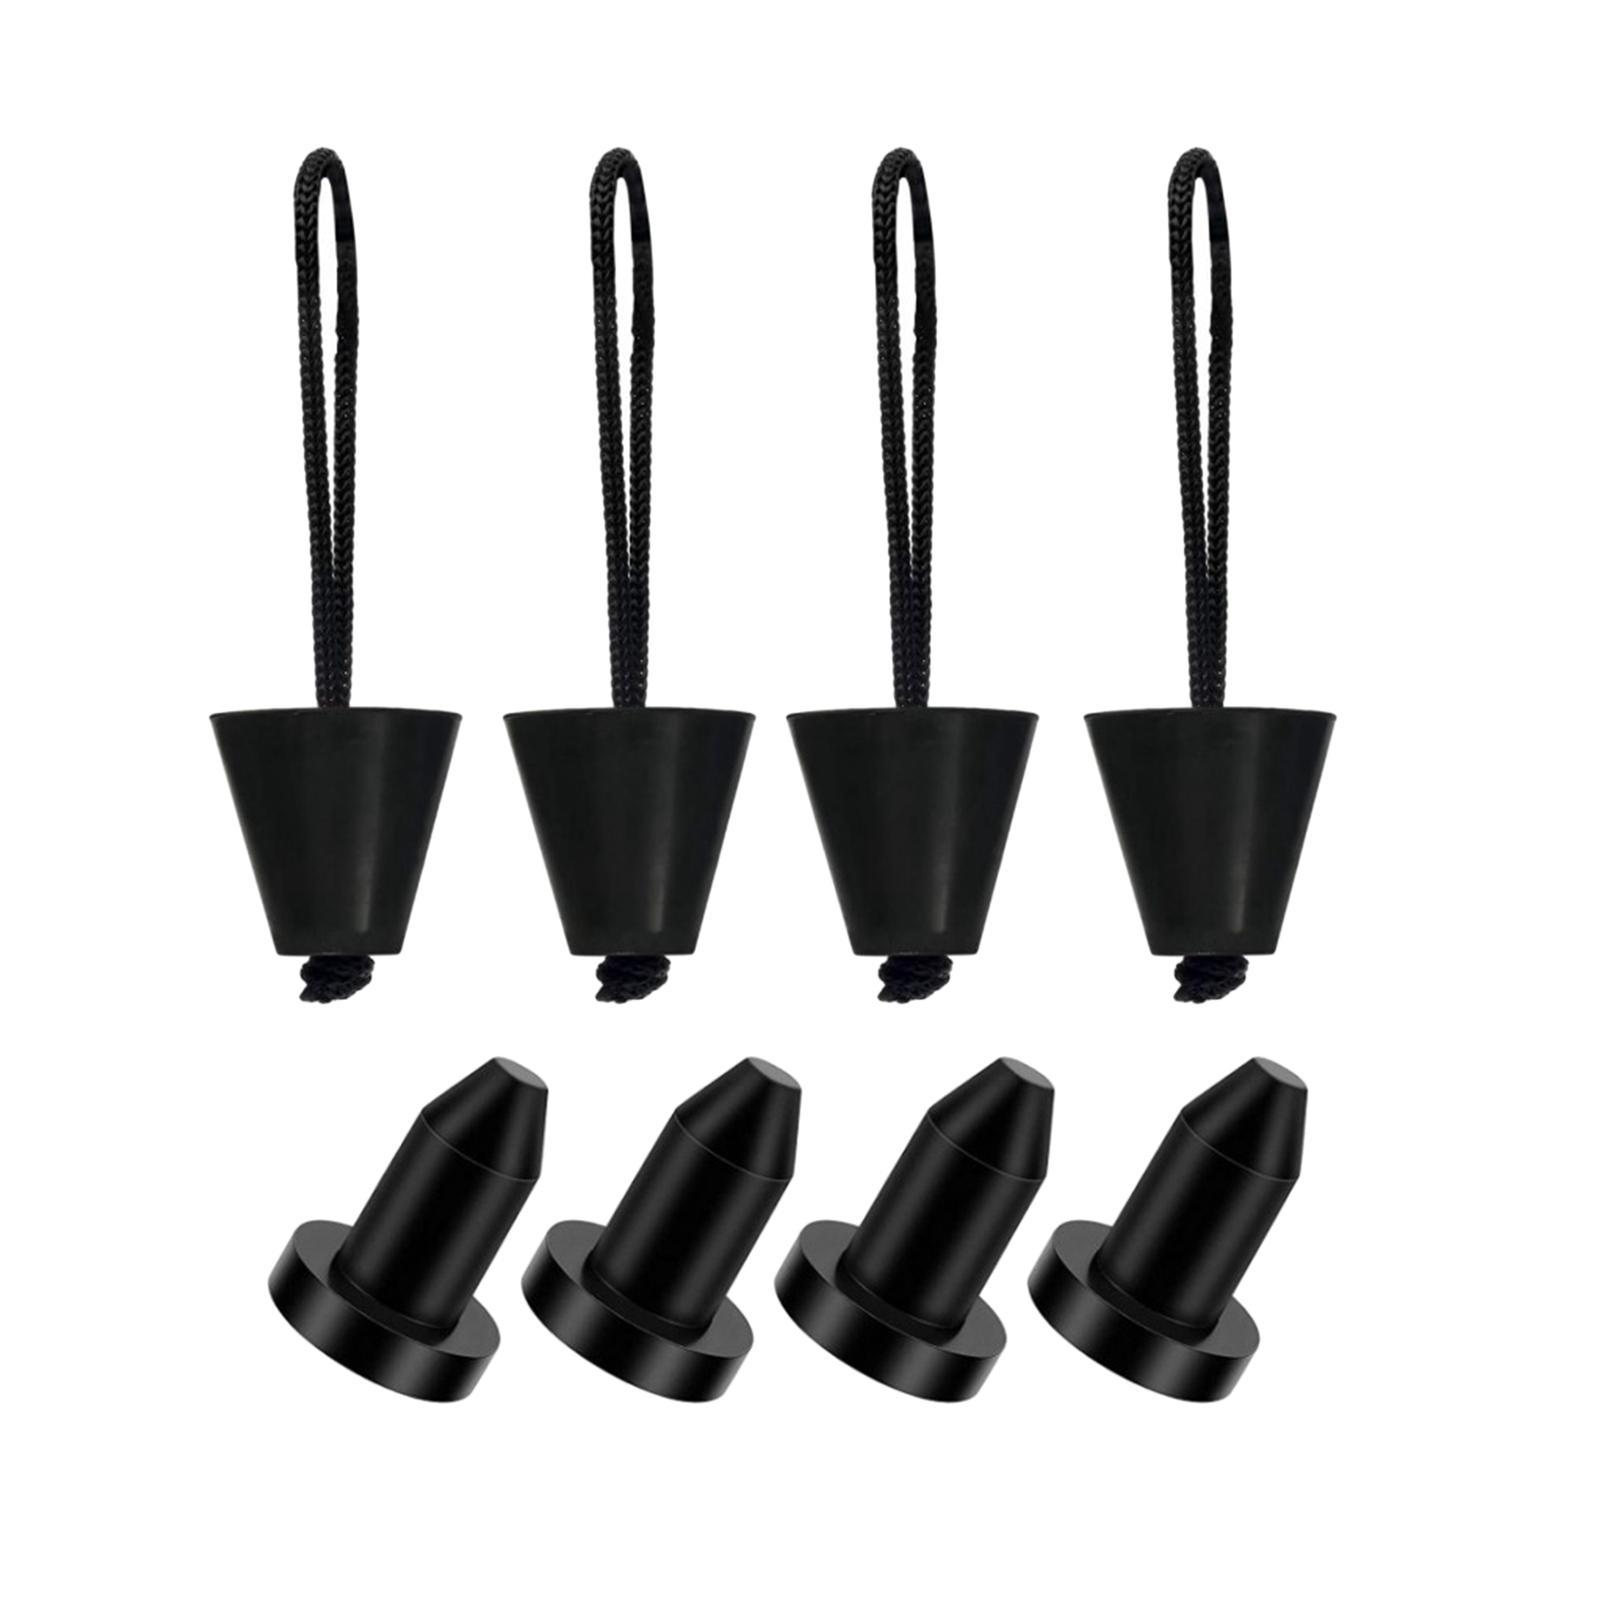 8x Kayak Scupper Plug  Kayak Drain Plug Accessories Supplies Silicone Drain Holes Stopper Bung for Raft Fishing Boat Canoe